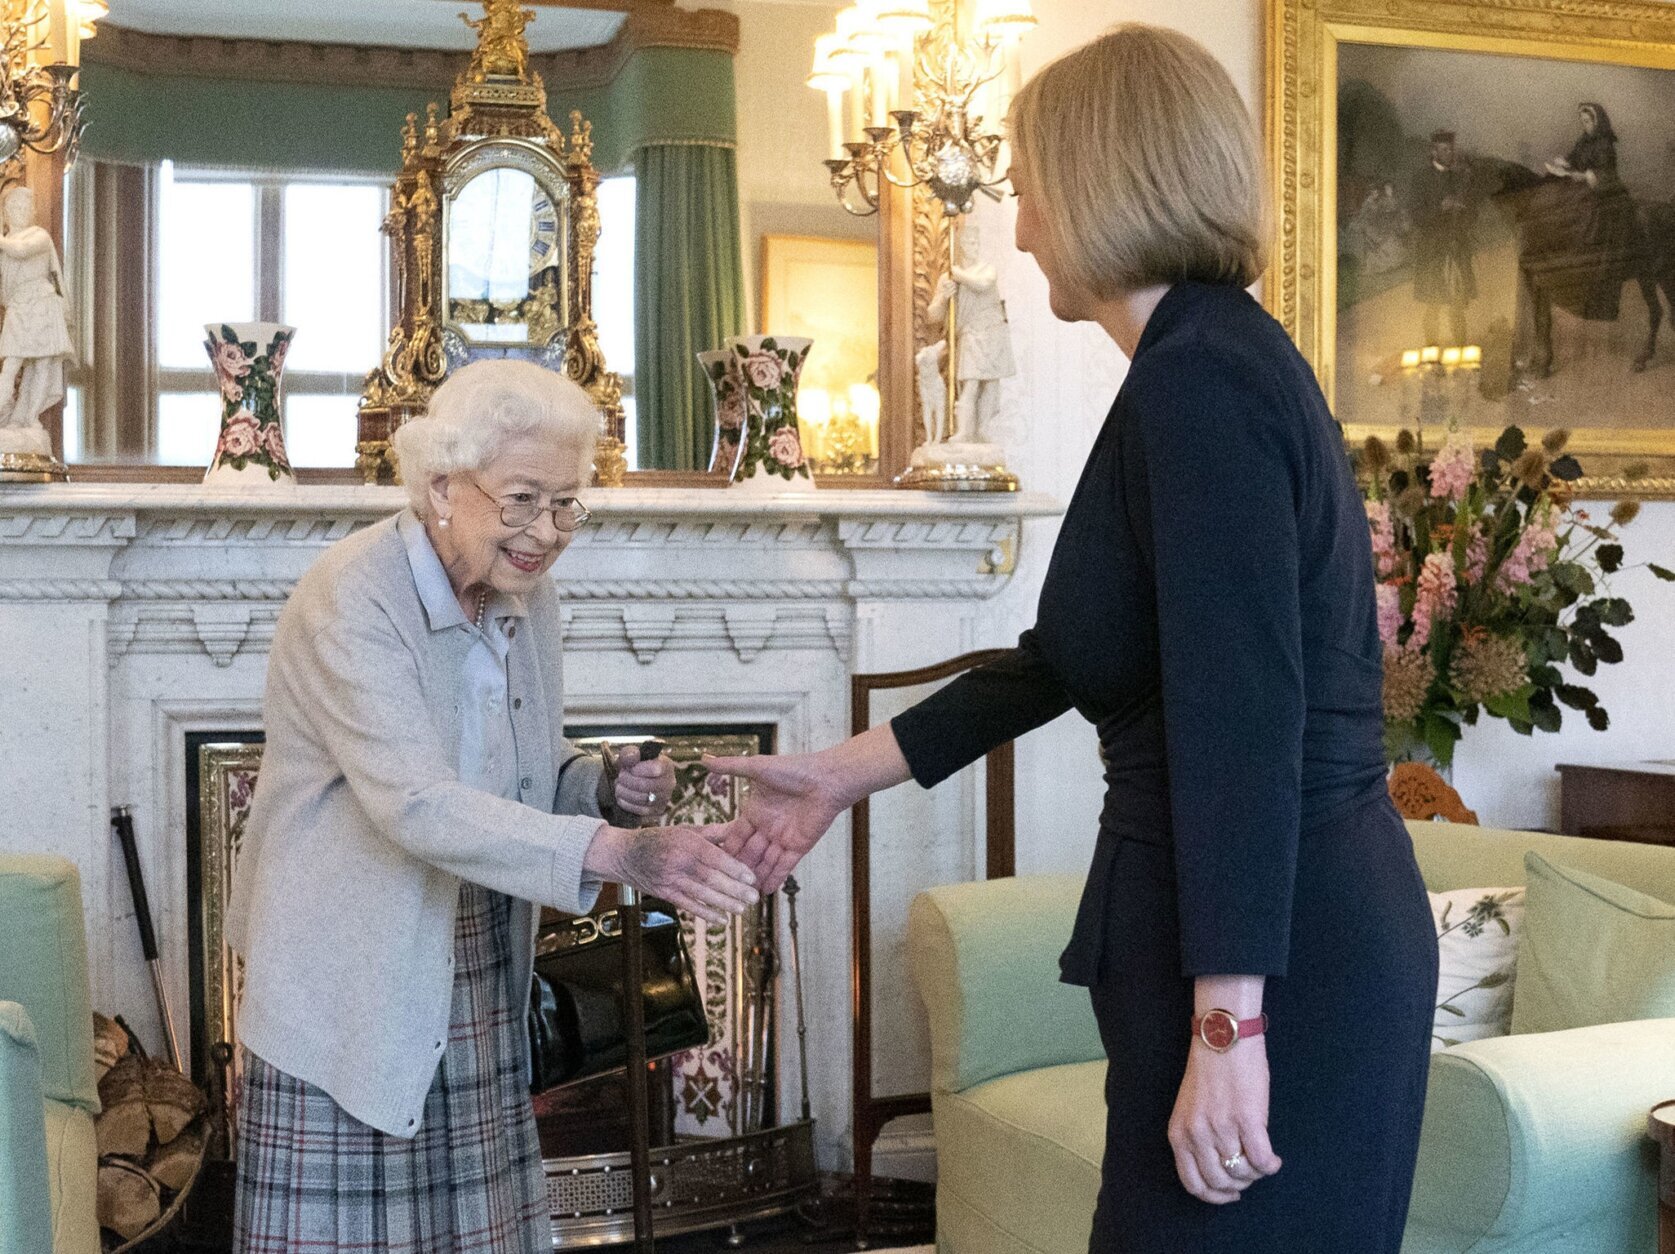 Britain's Queen Elizabeth II, left, welcomes Liz Truss during an audience at Balmoral, Scotland, where she invited the newly elected leader of the Conservative party to become Prime Minister and form a new government, Tuesday, Sept. 6, 2022. (Jane Barlow/Pool Photo via AP)